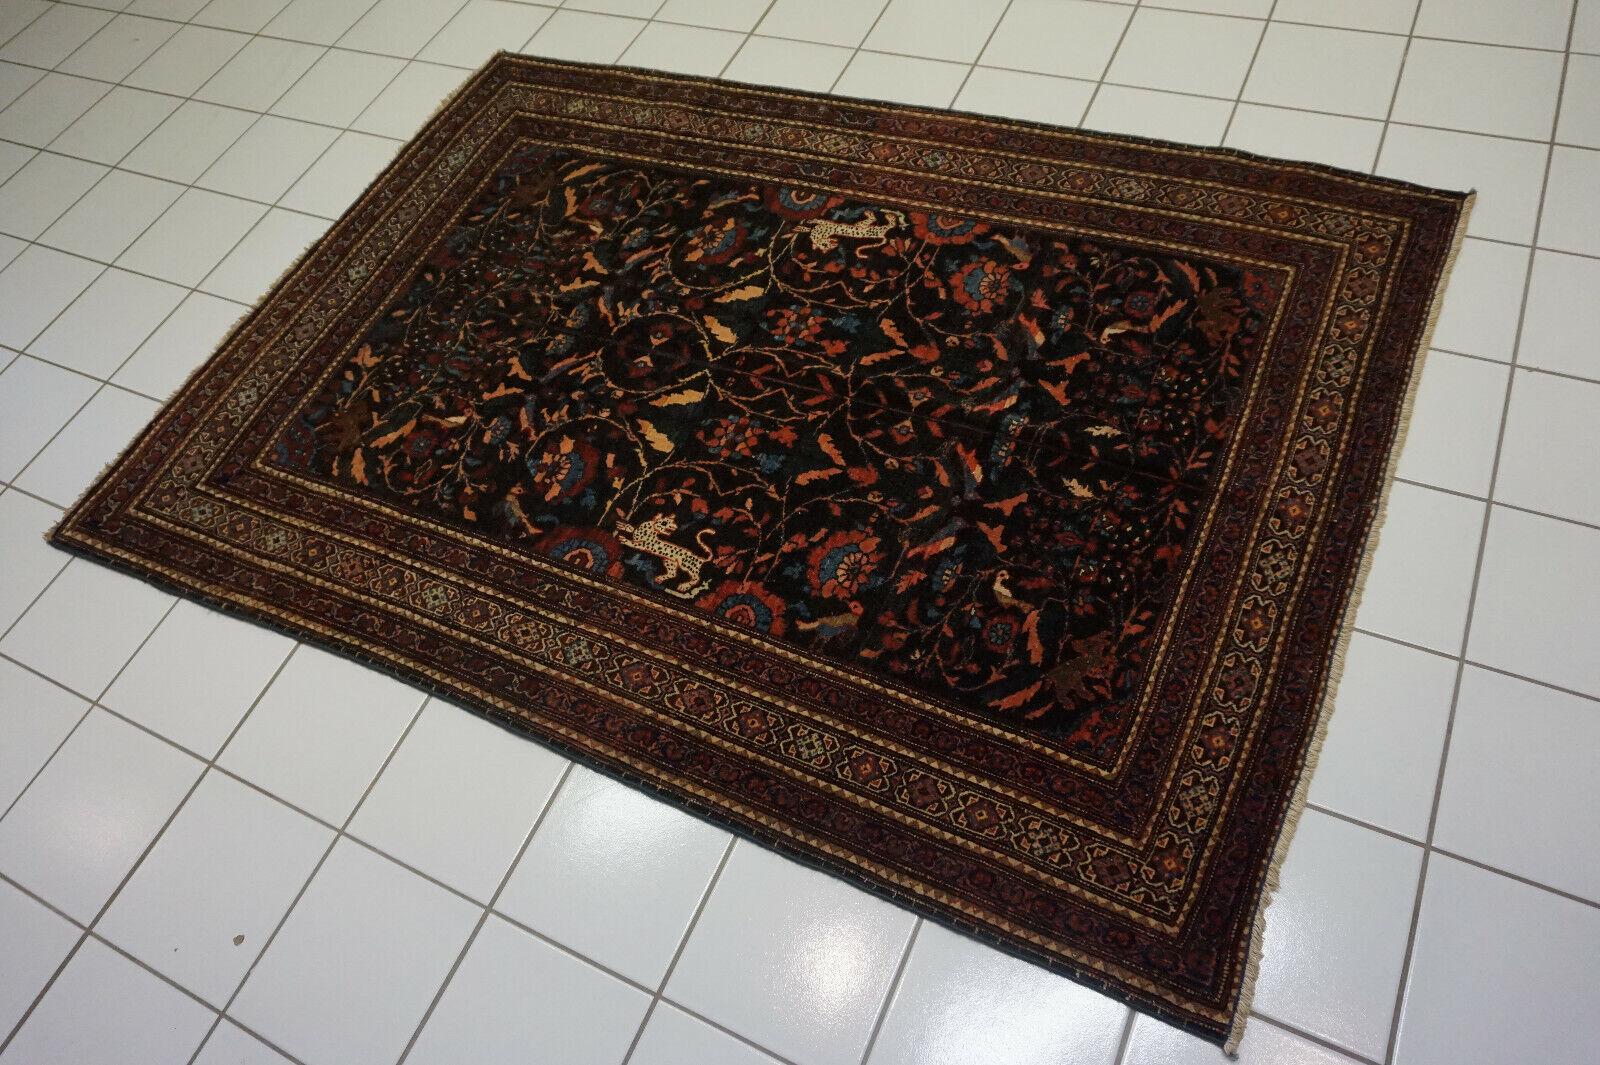 Handmade Antique Persian Tehran Rug: A treasure from the past, this exquisite rug carries the whispers of history and the artistry of its creators. Let’s unravel its story:

Product Description: Handmade Antique Persian Tehran